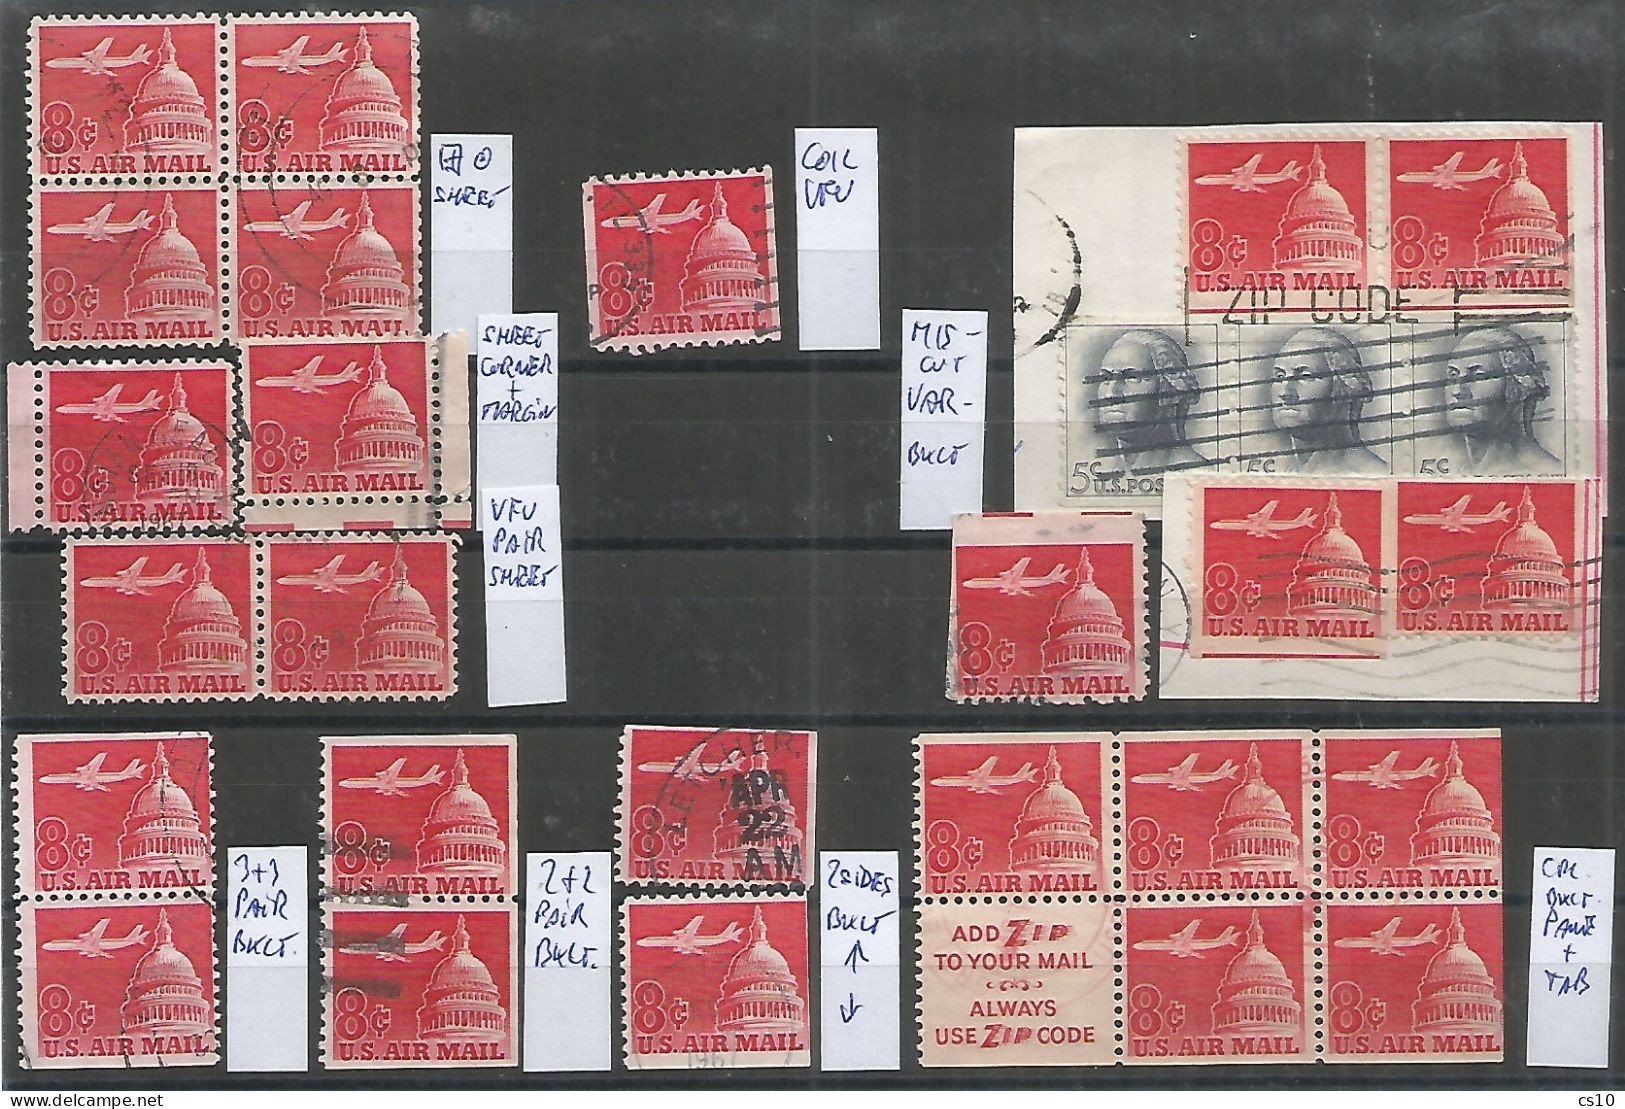 USA Airmail 1962 Jet & Capitol Dome SC# C64+65 Cpl Issue BL4 Sheet Coil Booklet Pane Pairs & Singles + Small Variety - Rollenmarken